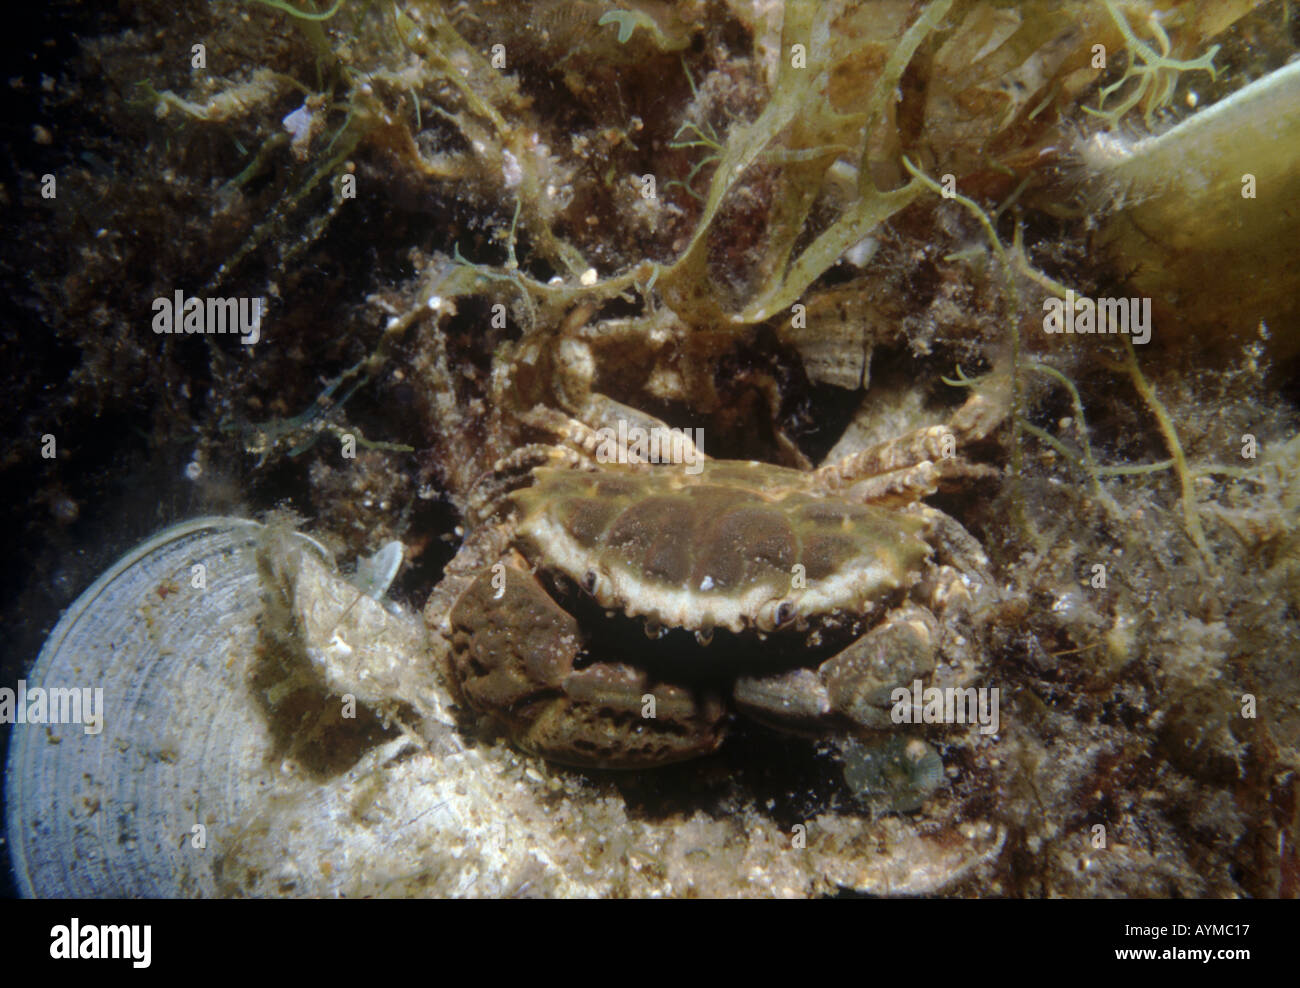 A small crab 'Xantho hydrophylus' tucks itself into a defensive pose. Stock Photo